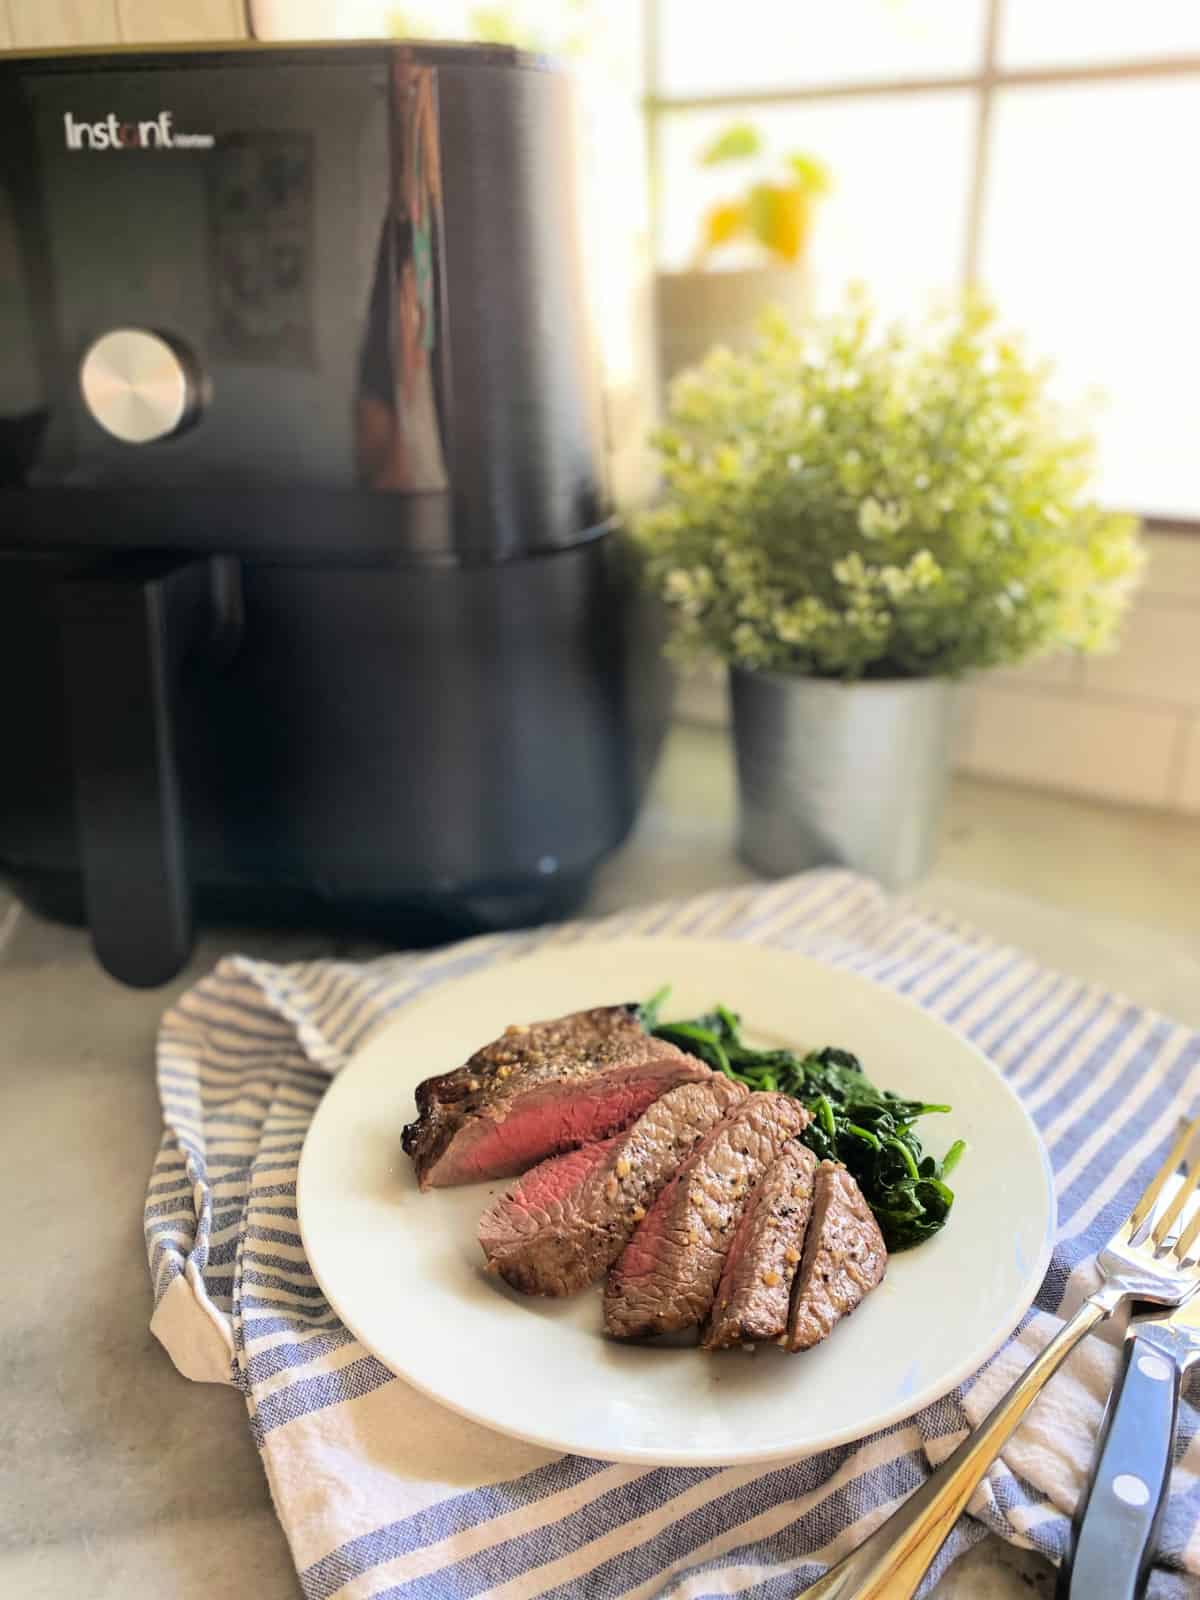 Pieces of sliced steak with sauted spinach on a white plate with an Air Fryer in the background.